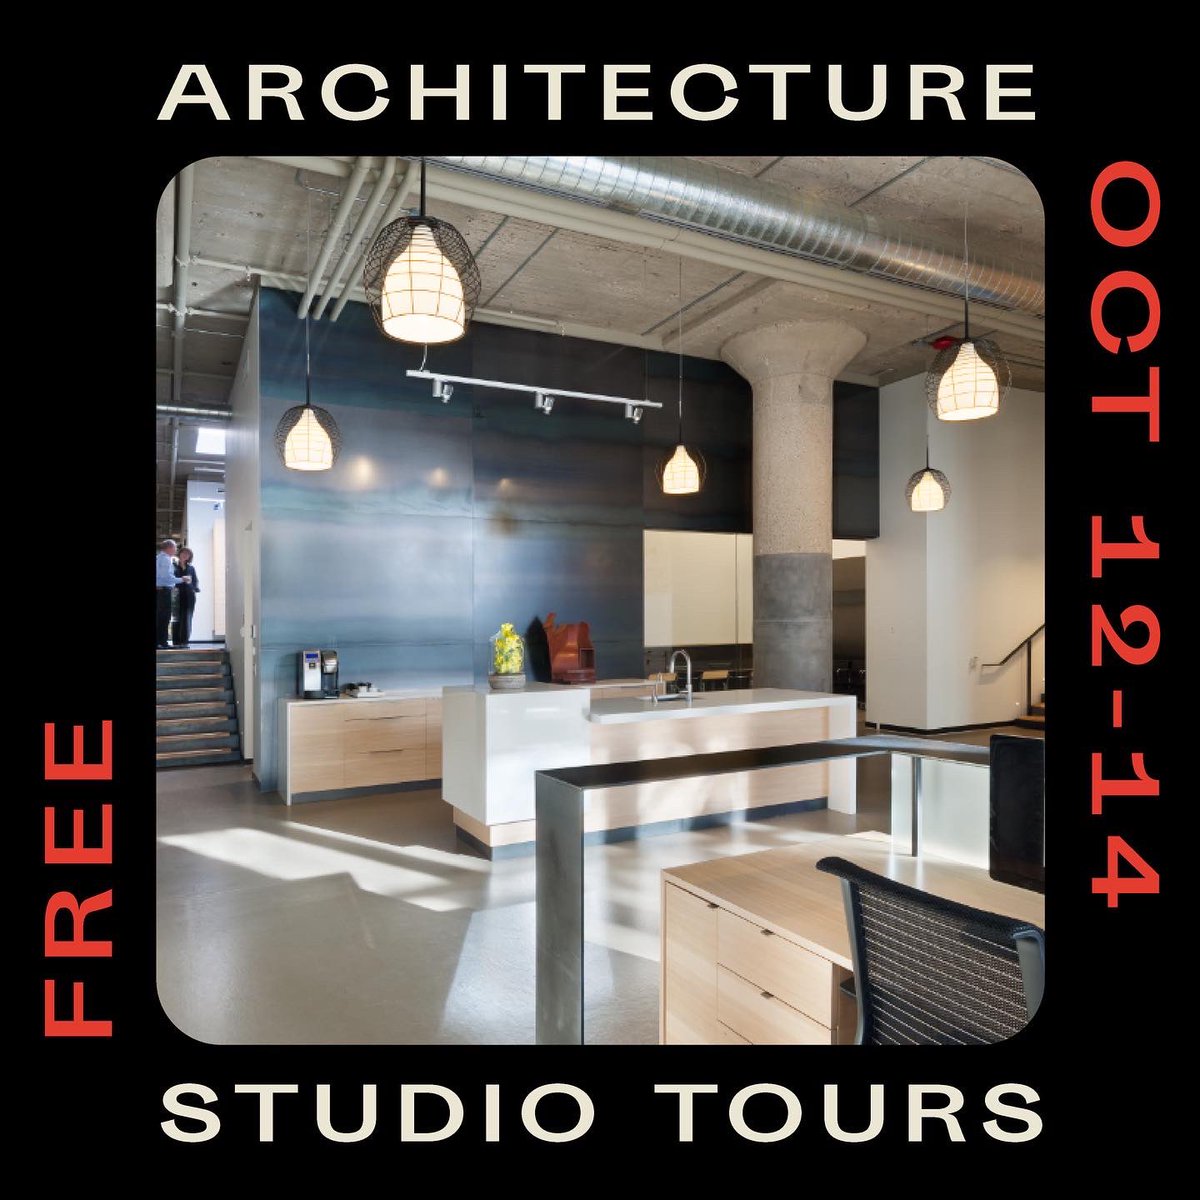 #YEGdesignweek22’s Studio Tour Series showcases some of the best architecture firms in Edmonton, so you can ask all of those burning questions, while hearing about some super cool projects. We visit 6 arch firms! These events are FREE, but please RSVP: edmontondesignweek.com/events/